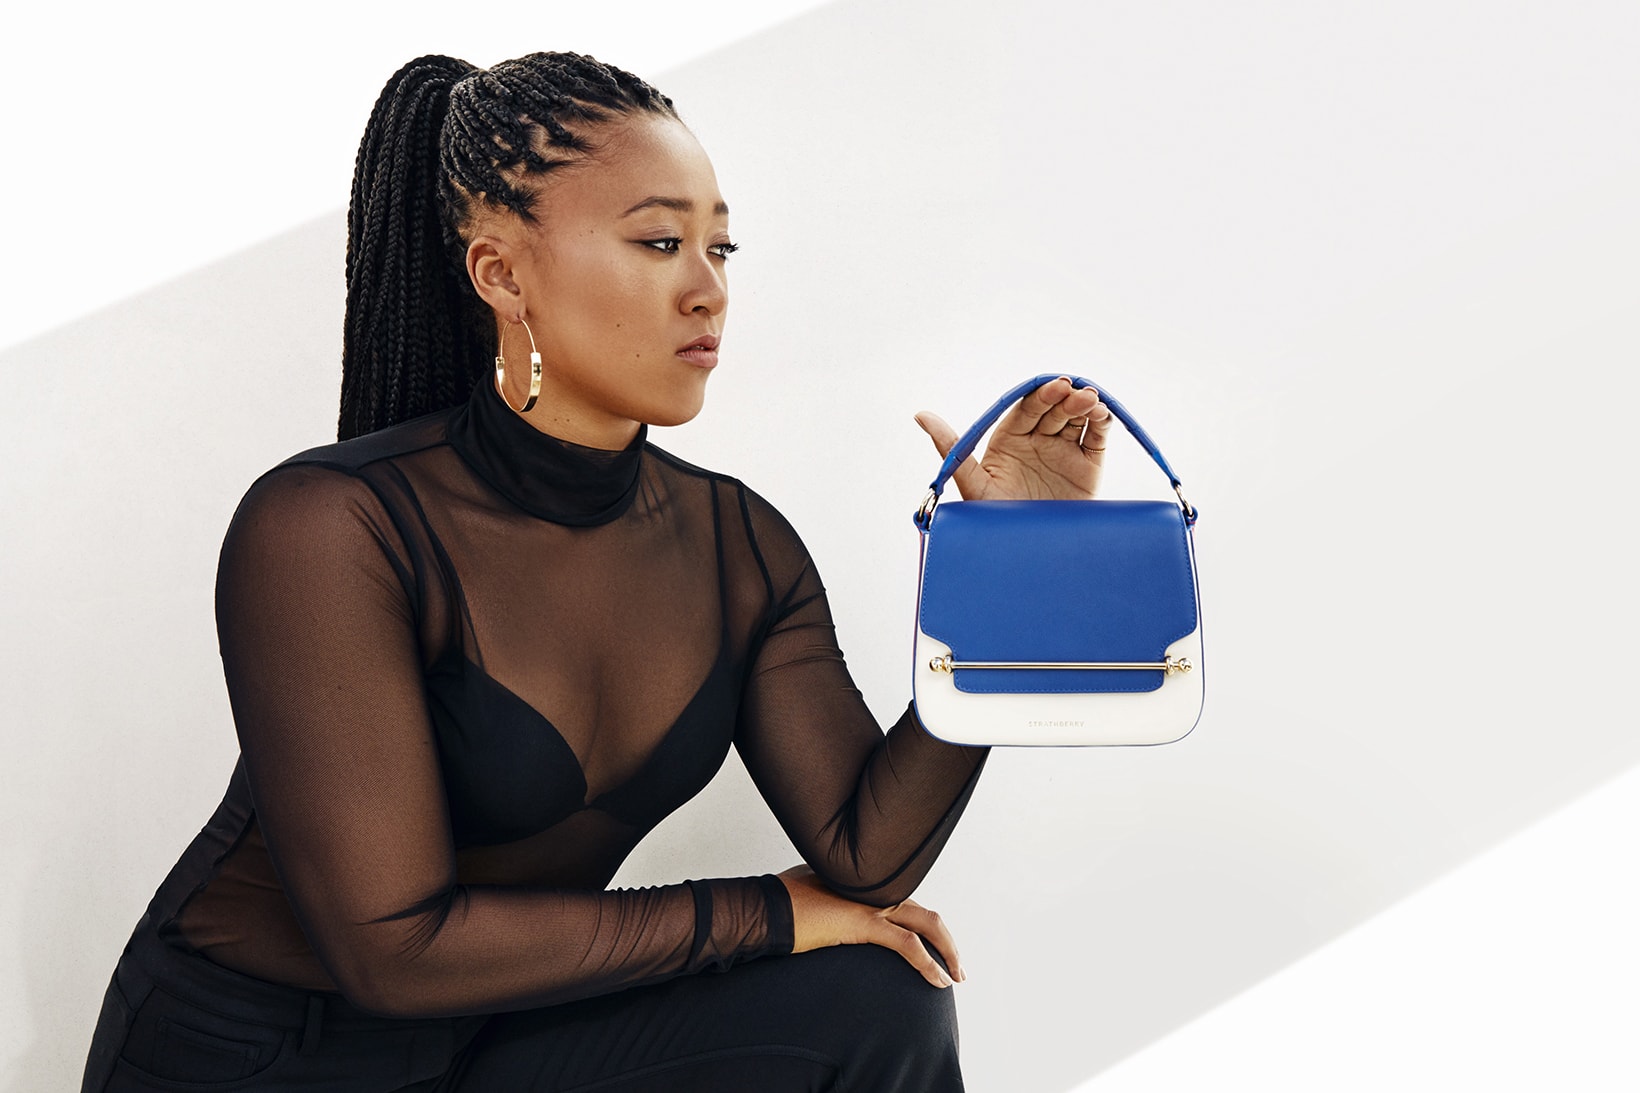 Naomi Osaka x Strathberry Bag Collaboration Collection Campaign Ace Allegro